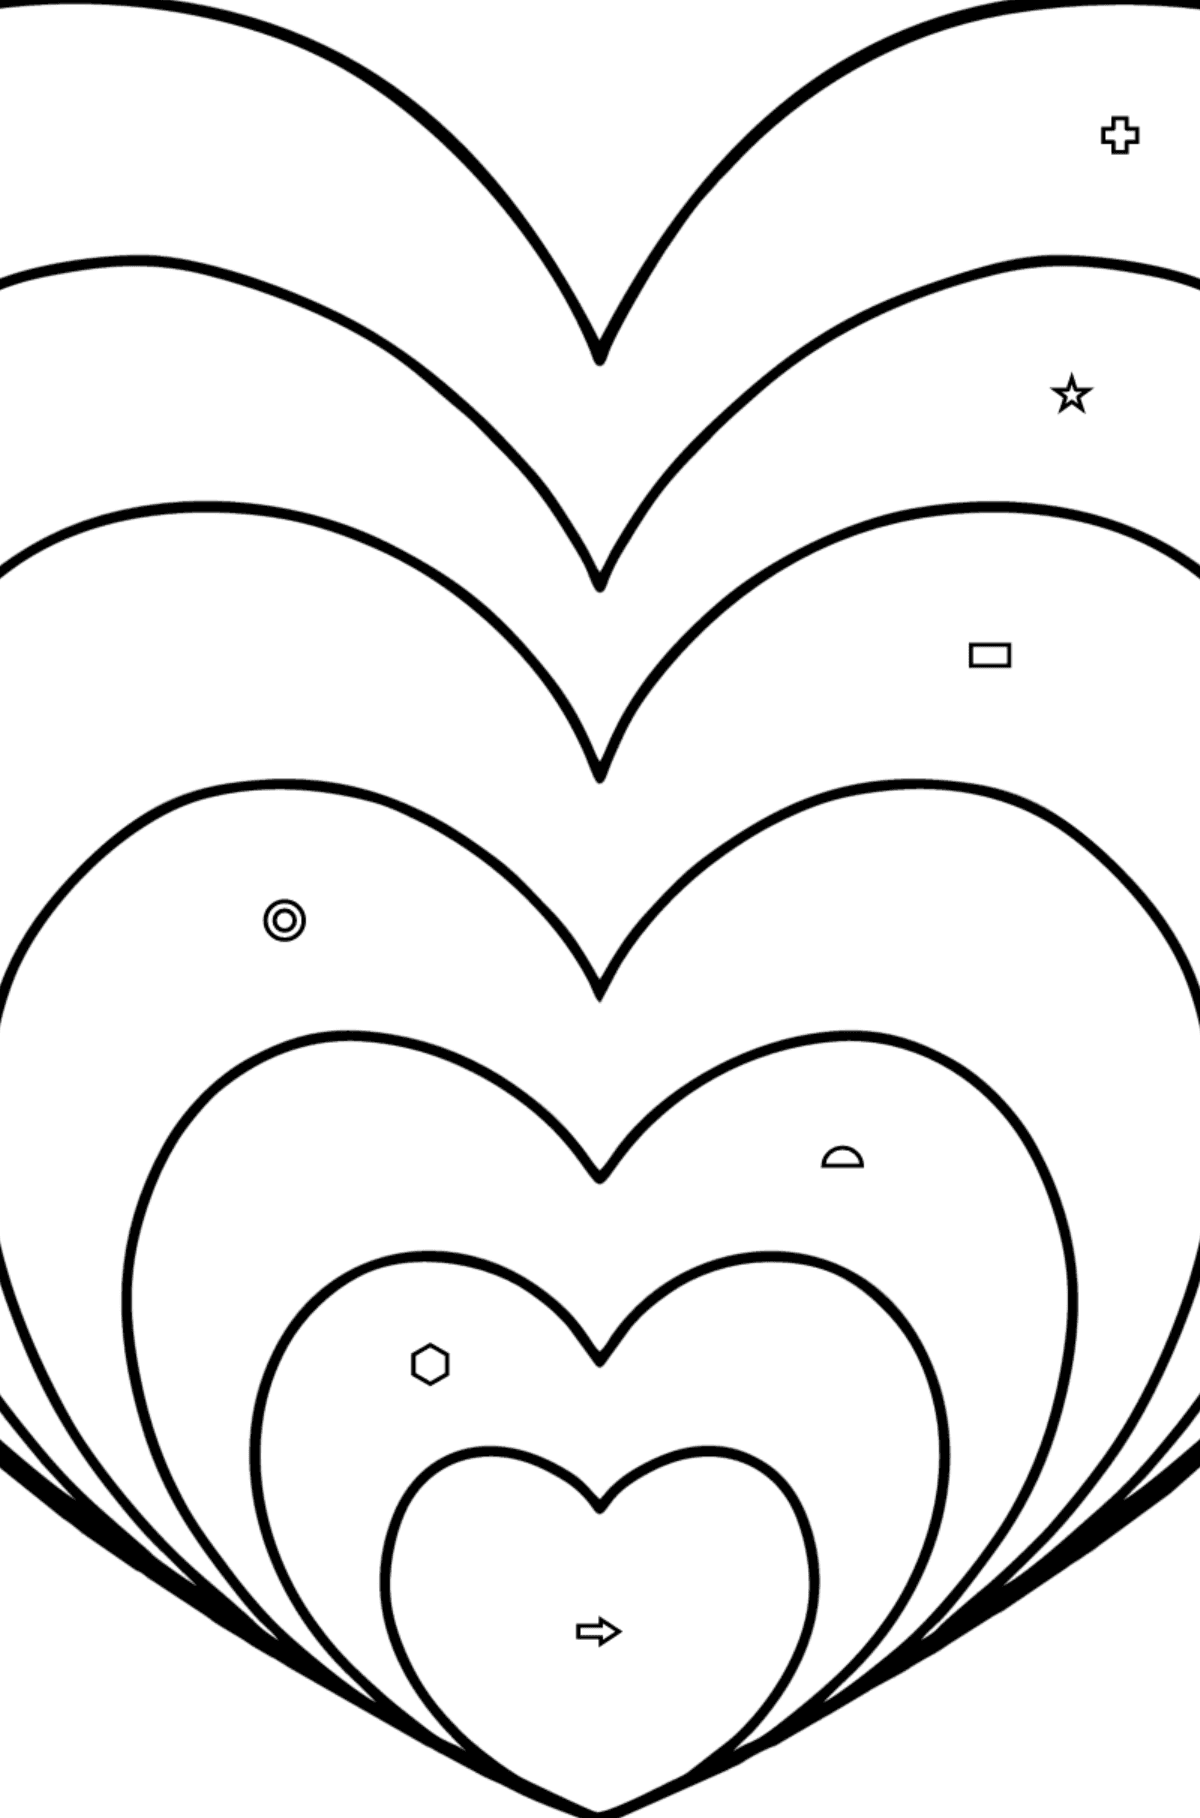 Simple Zen heart coloring page - Coloring by Geometric Shapes for Kids